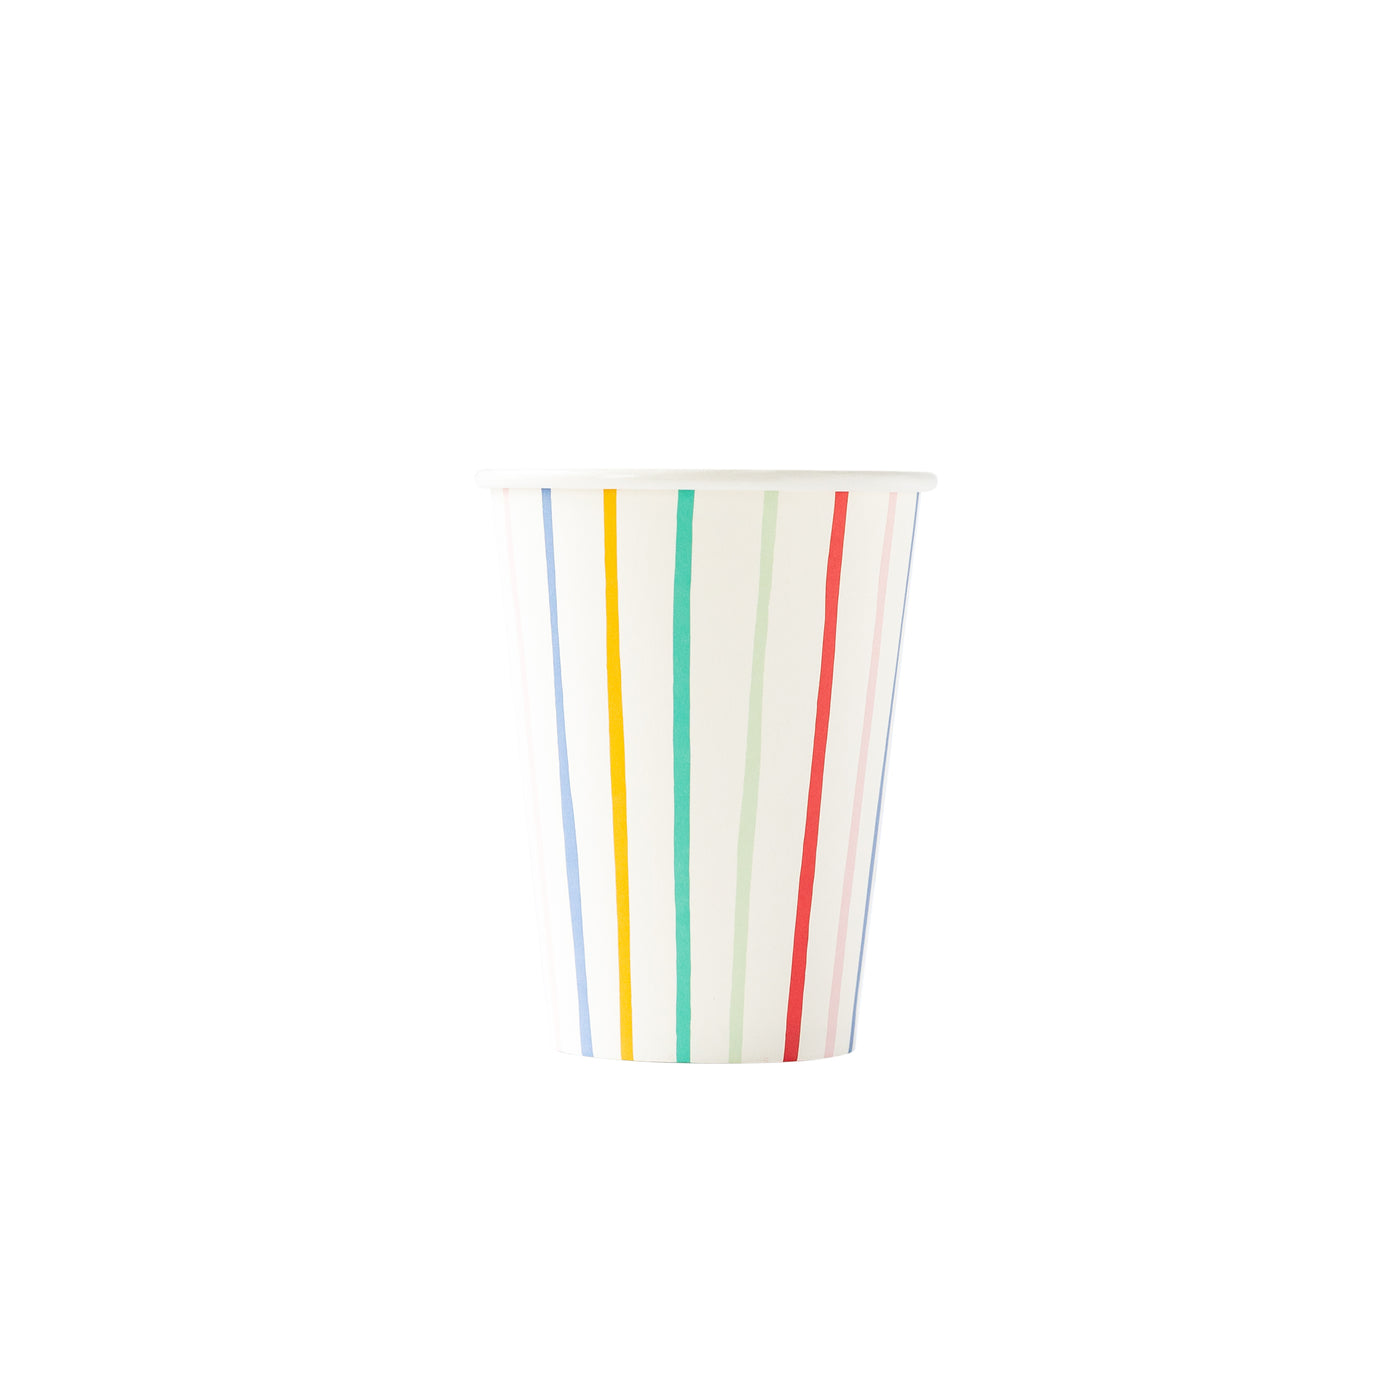 OPB811 - Oui Party Birthday Paper Party Cups